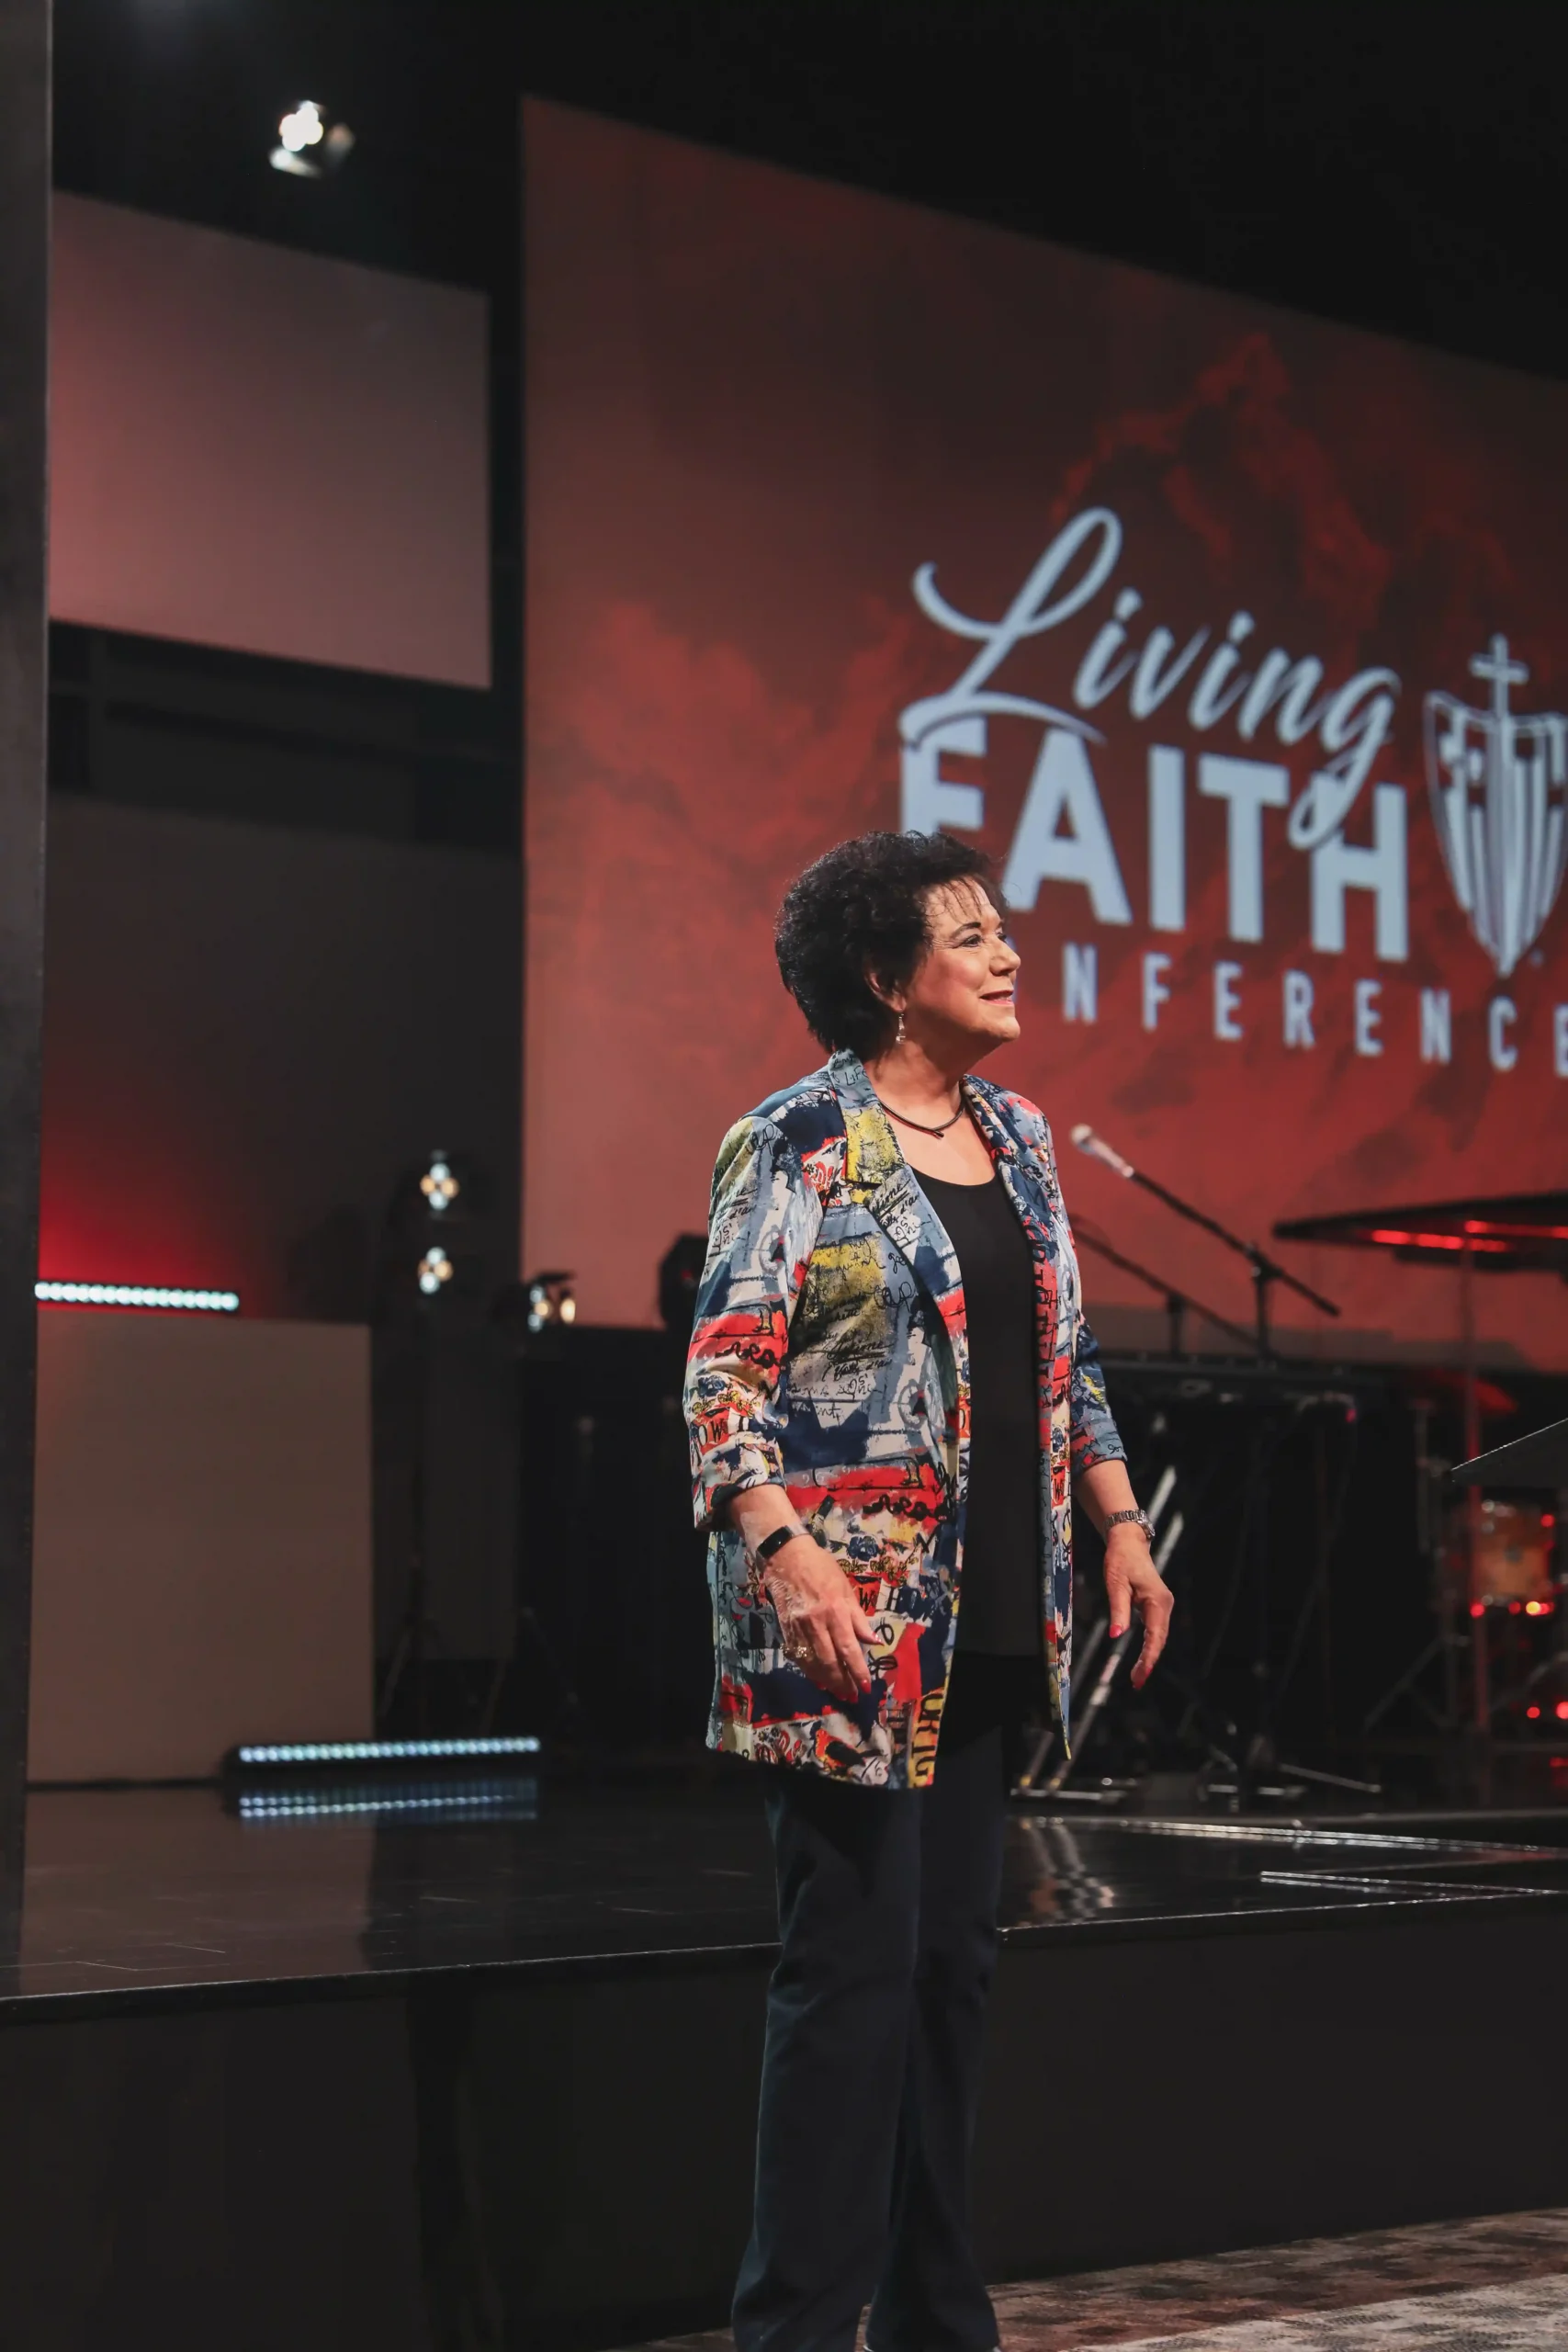 Lynette Hagin preaching red background with colorful suit